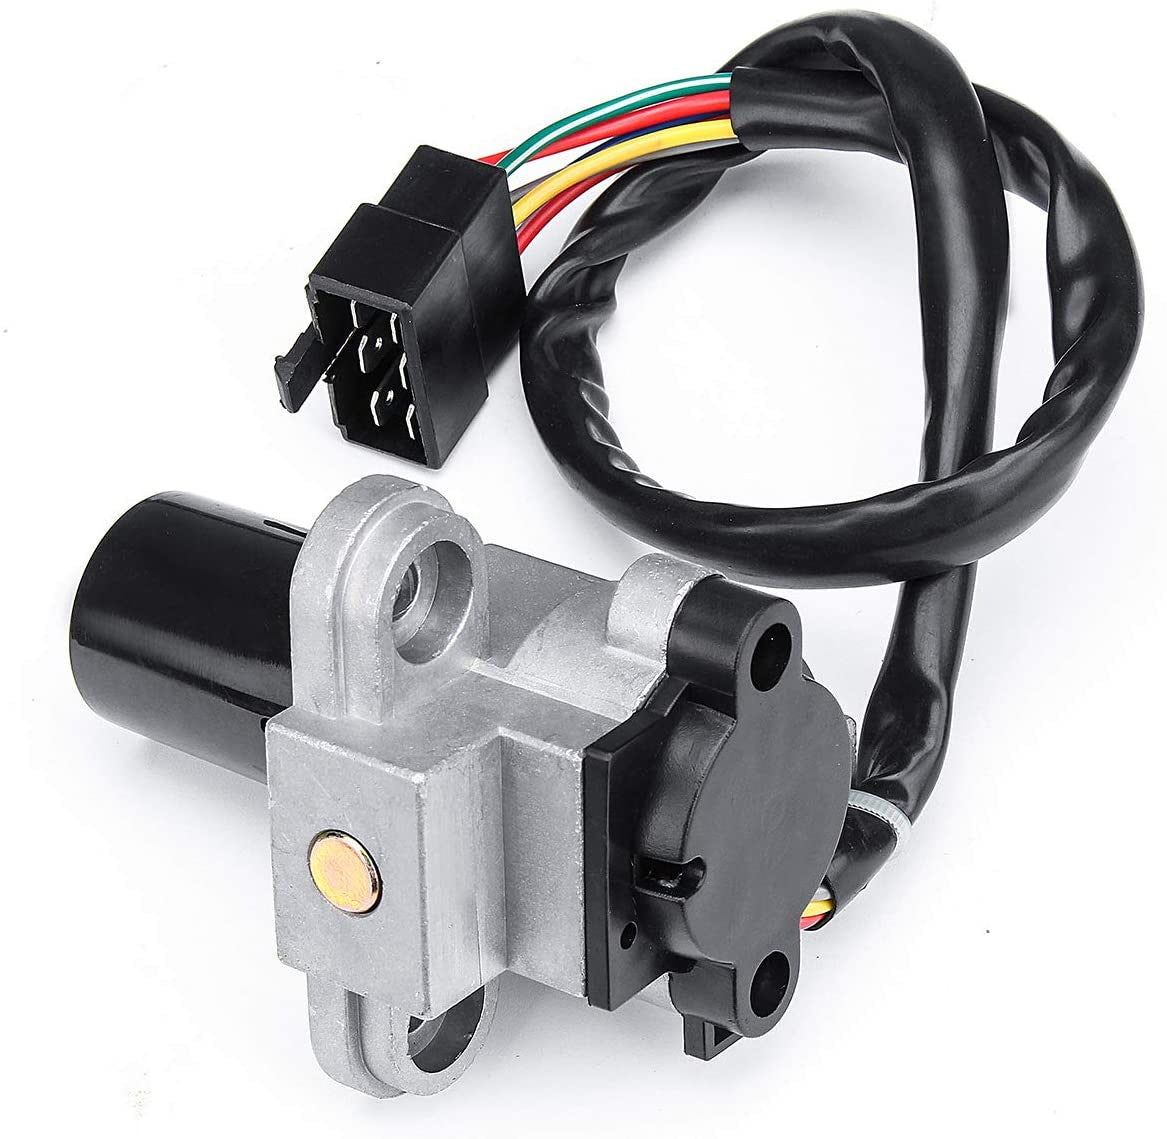 Main Key Switch set for the Ducati Motorcycles